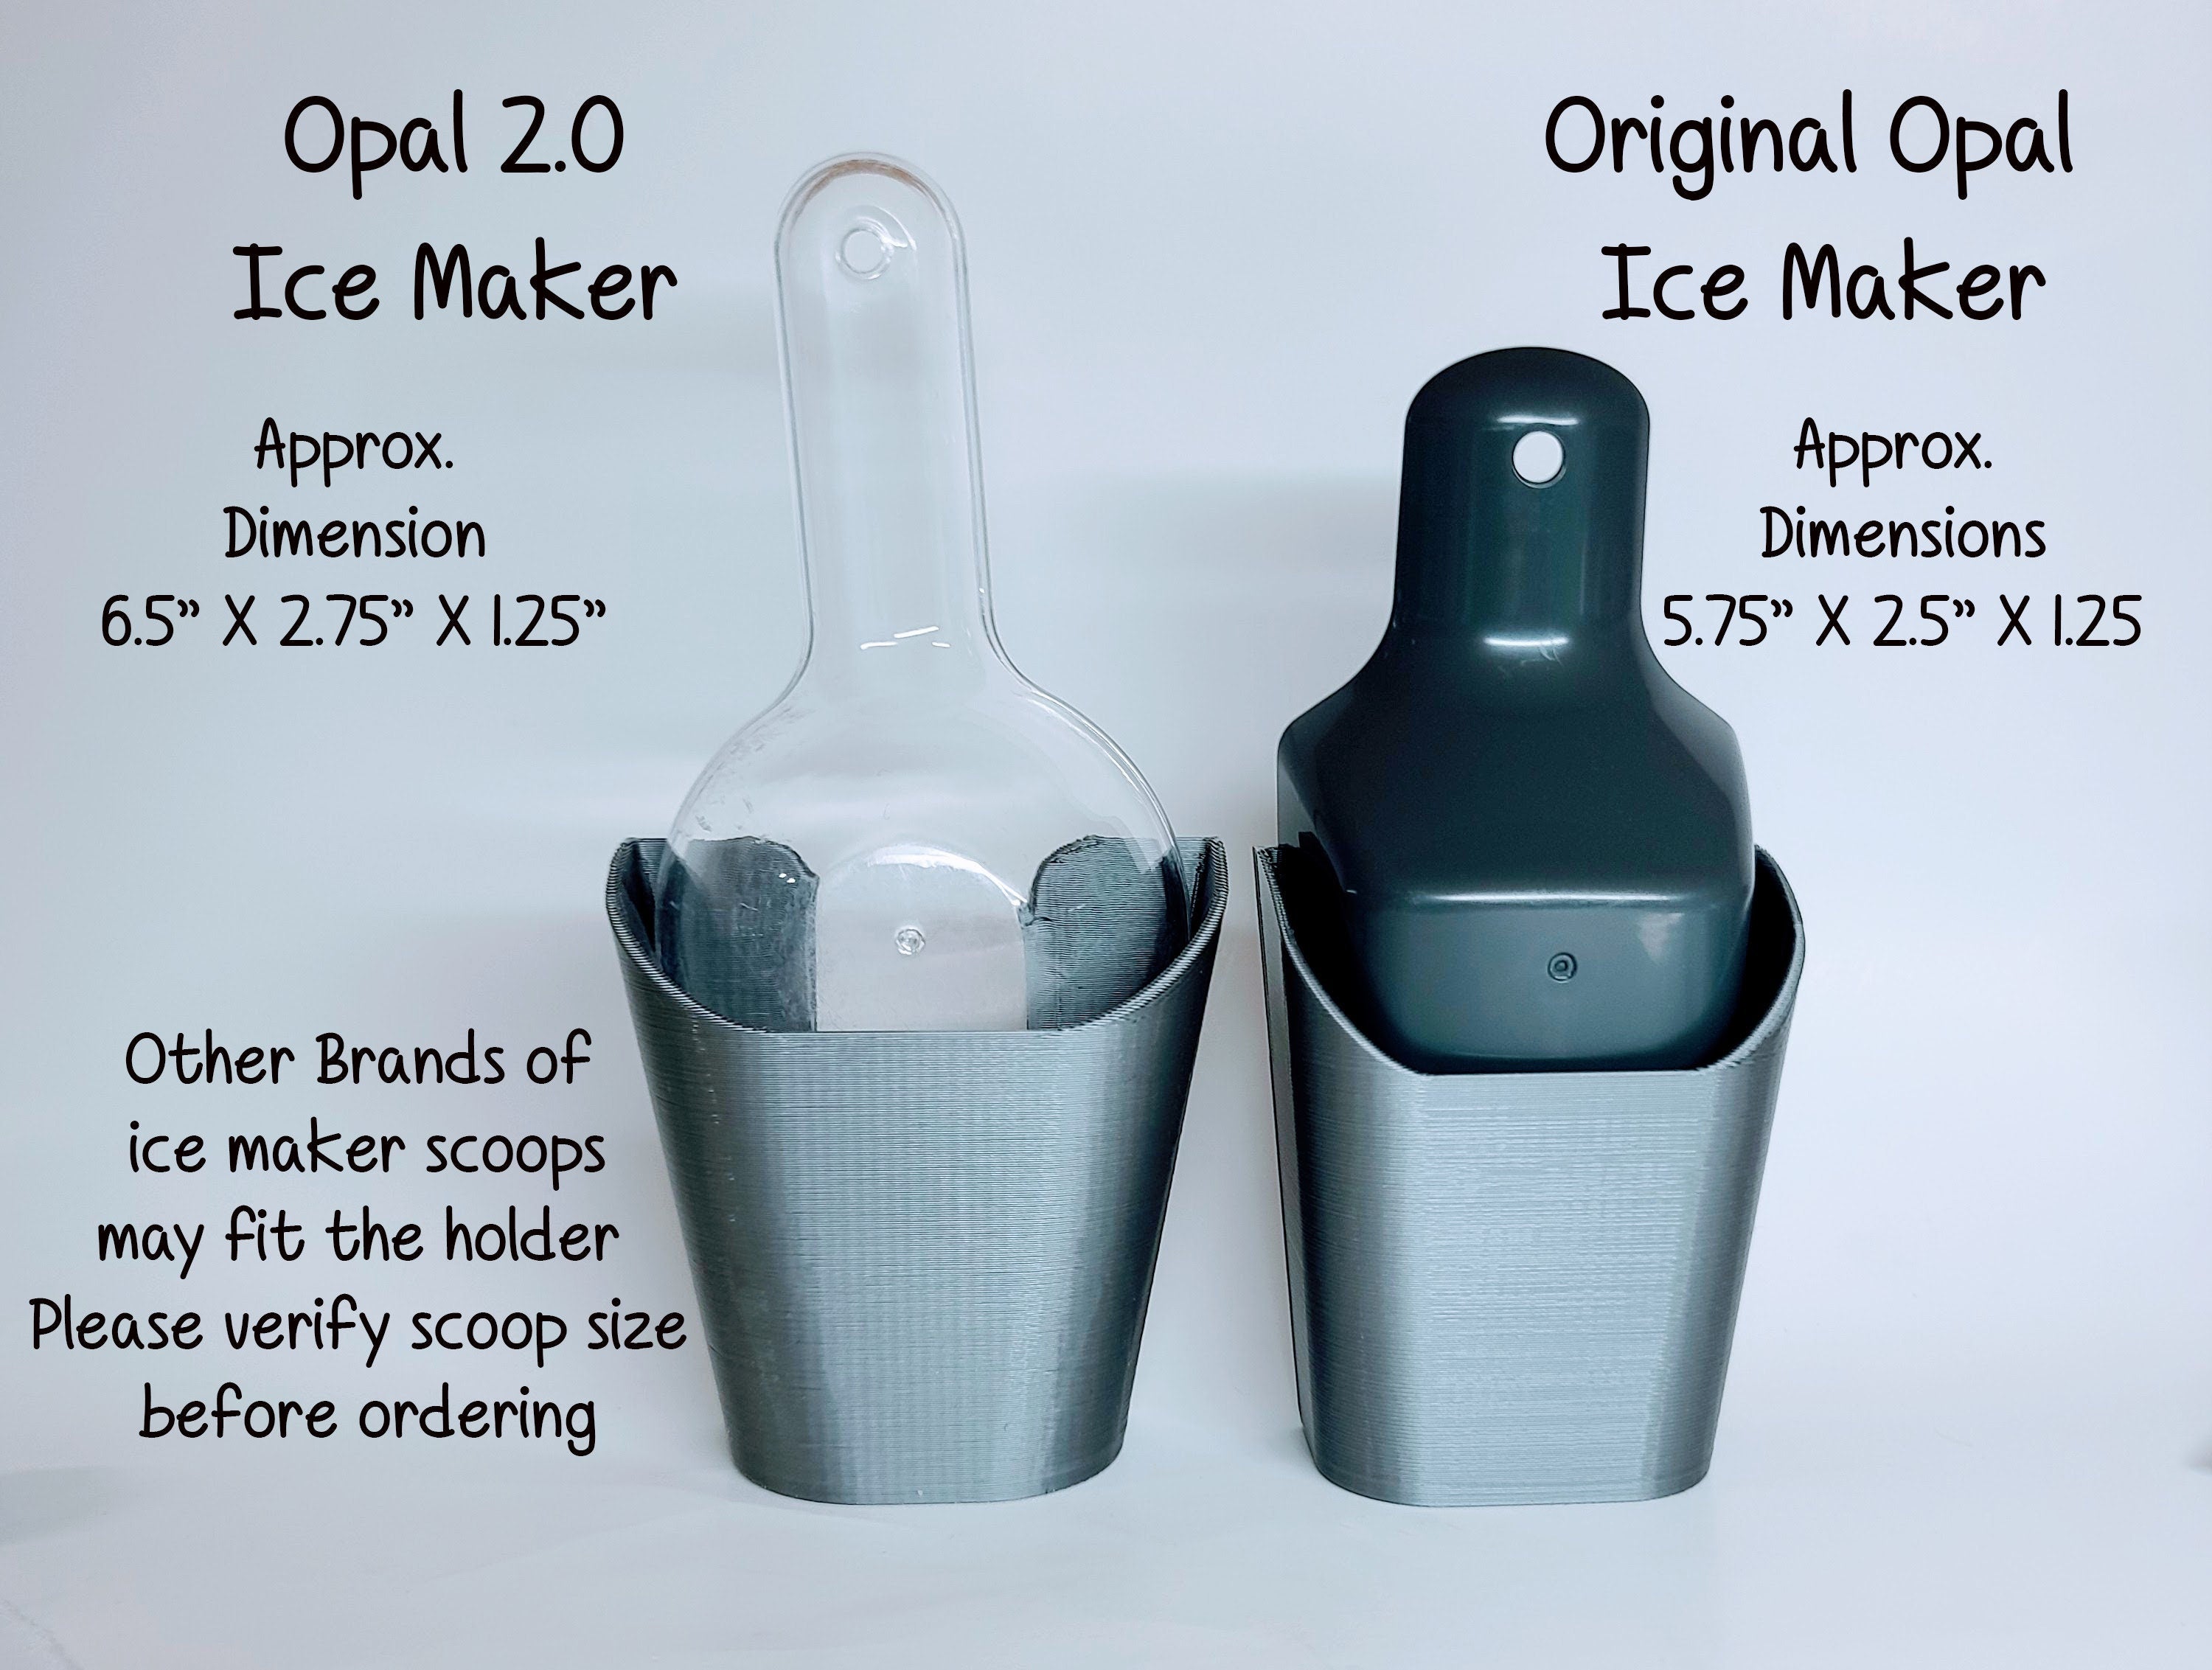 Ice Scoop Holder - Fits Opal Version 1.0 or 2.0 Ice Makers